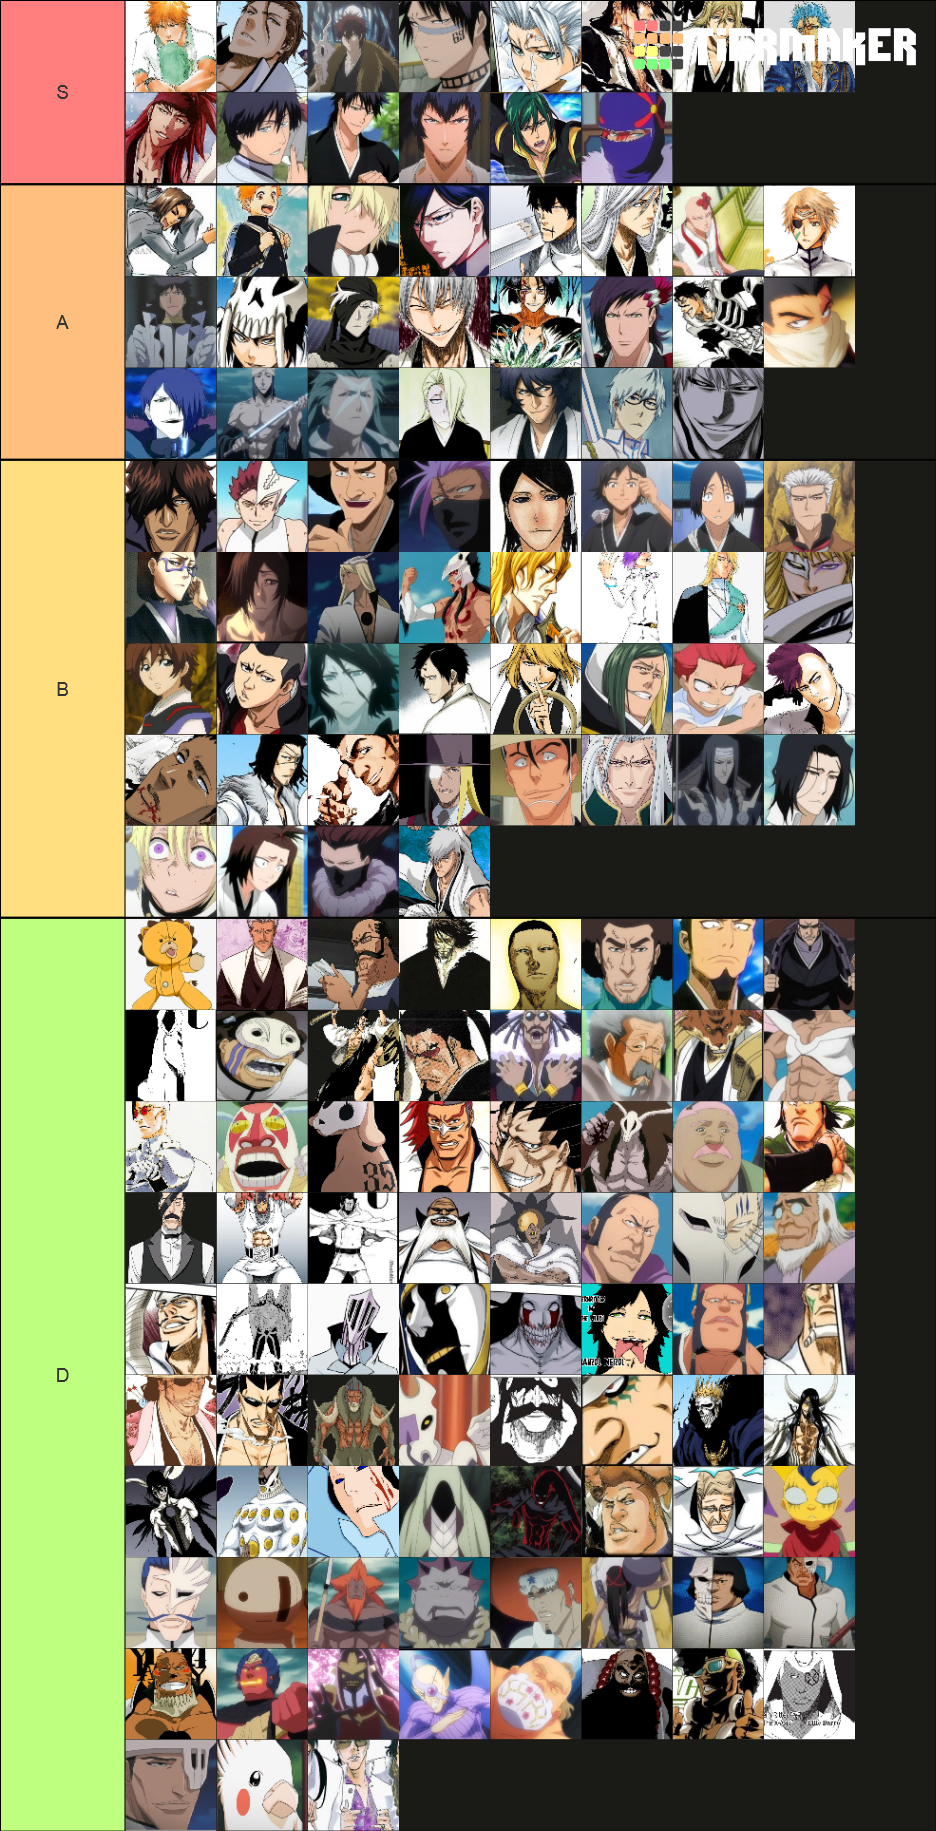 Undisputed Anime Podcast - Bleach Anime Openings l Tier List